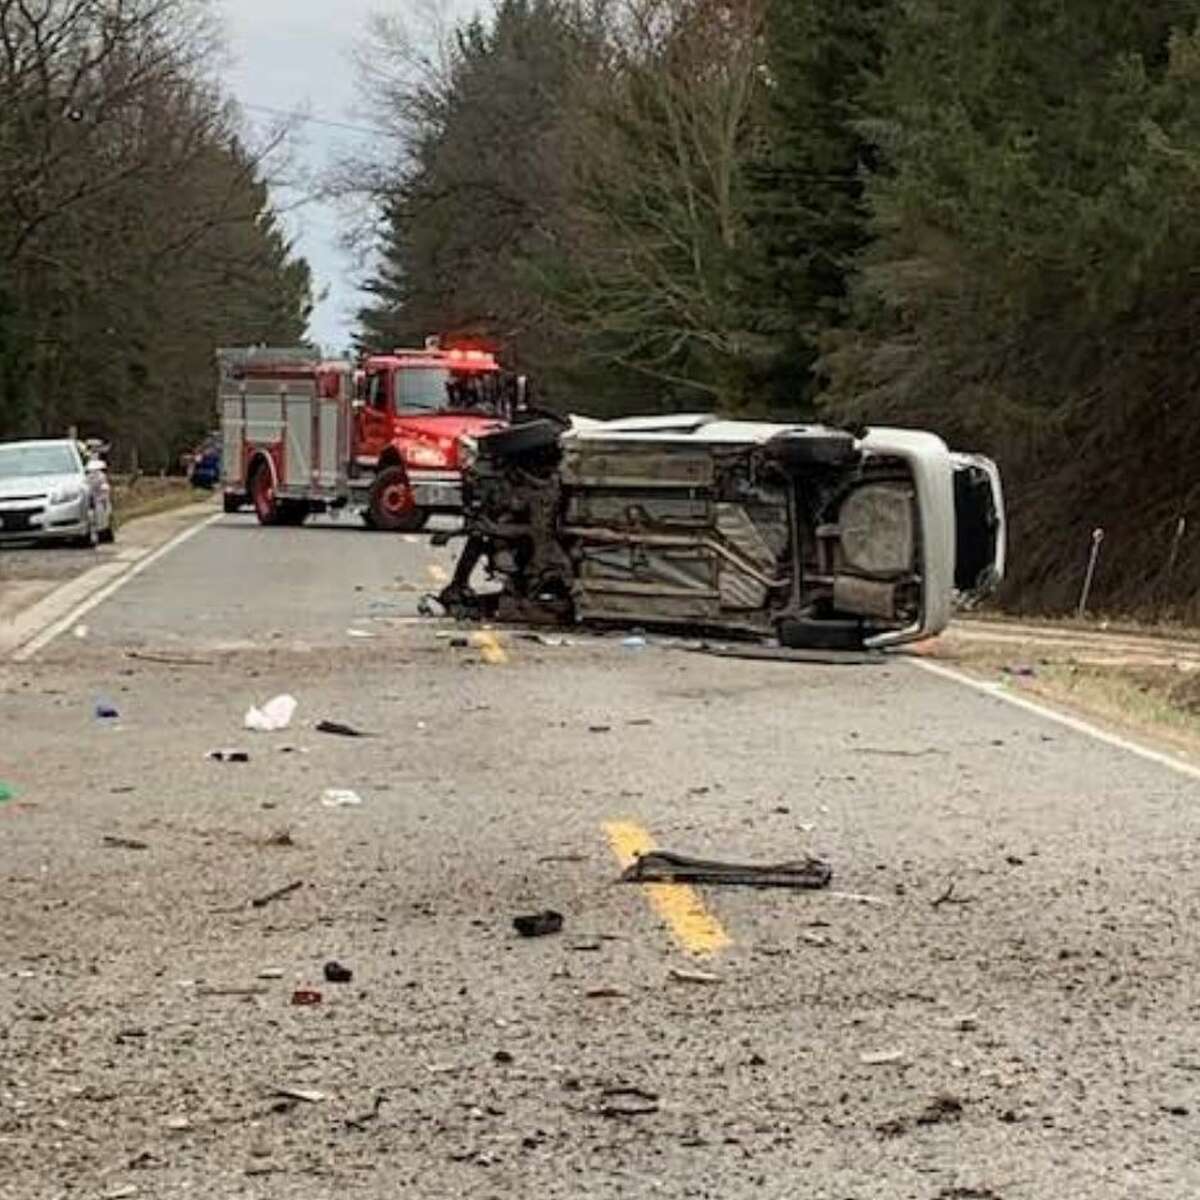 Michigan State Police Tri-City Post troopers responded to the crash at roughly 5:30 p.m. Wednesday, April 20.